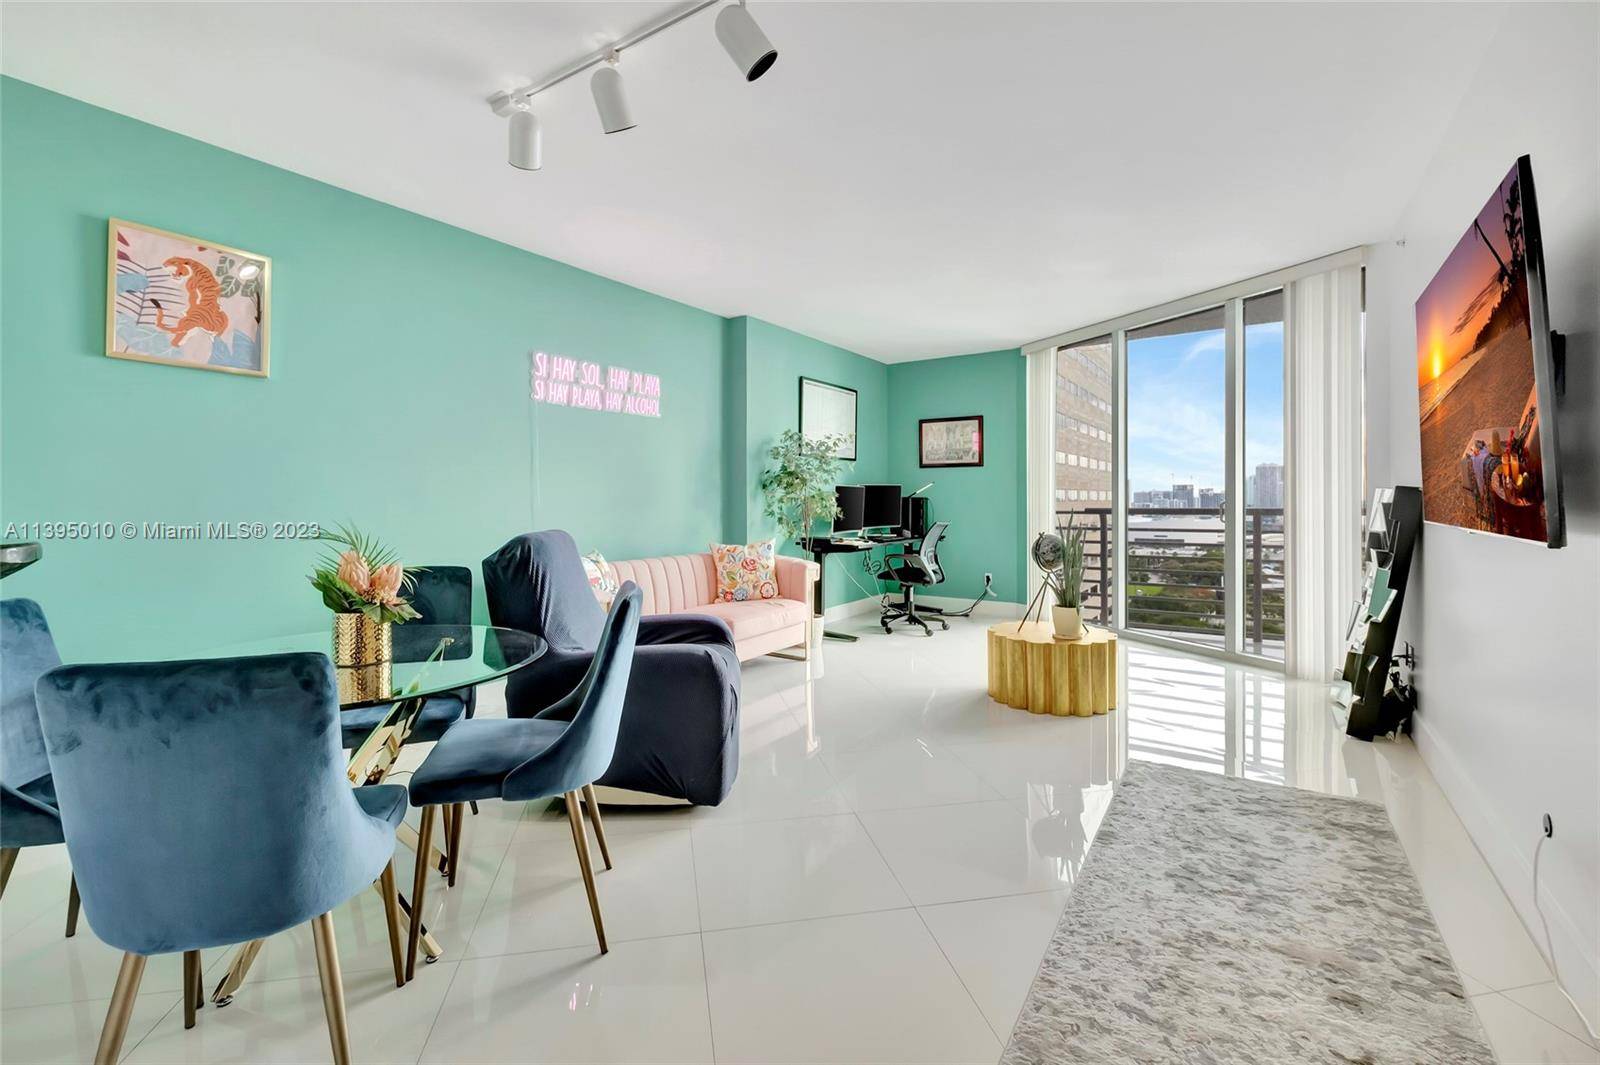 Welcome to One Miami 2616 with breathtaking views of the city skyline and Biscayne Bay.